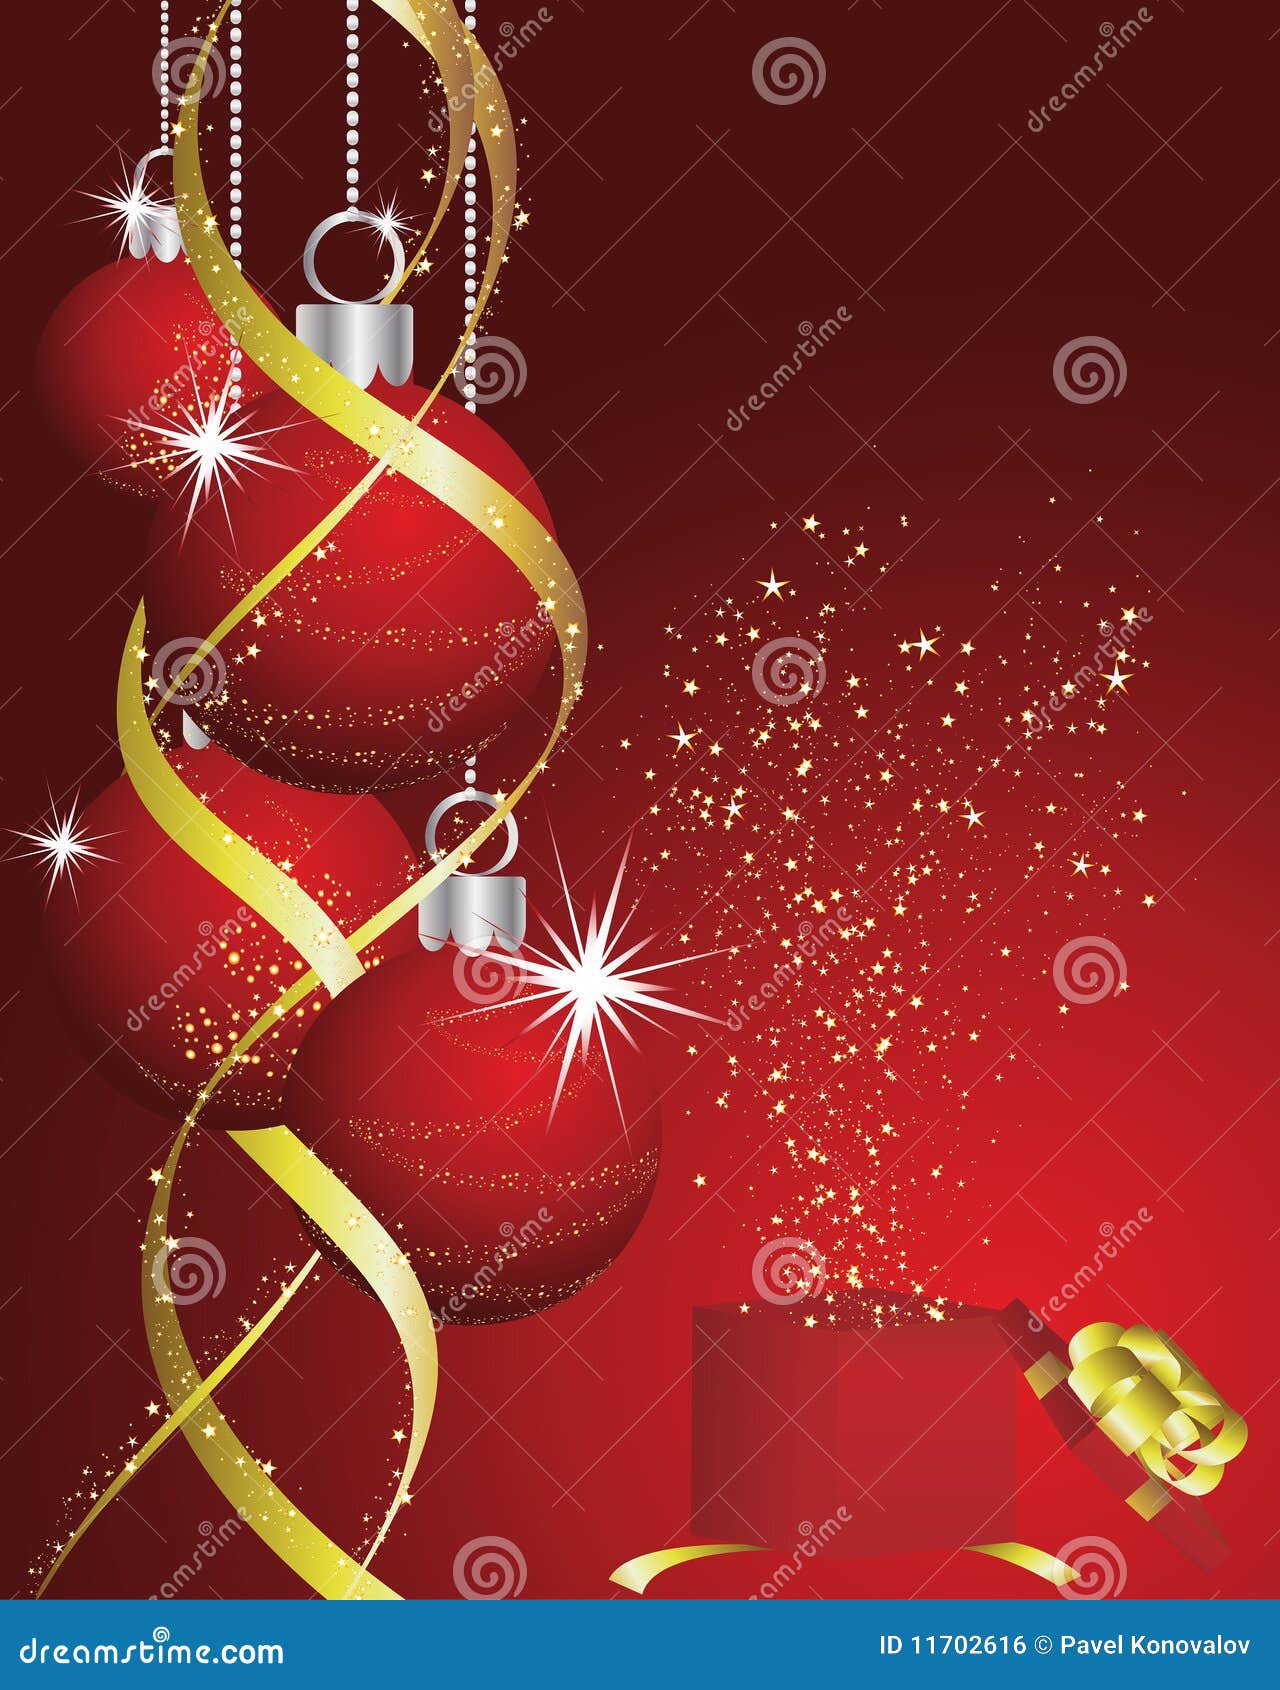 Christmas background stock vector. Illustration of decorations - 11702616